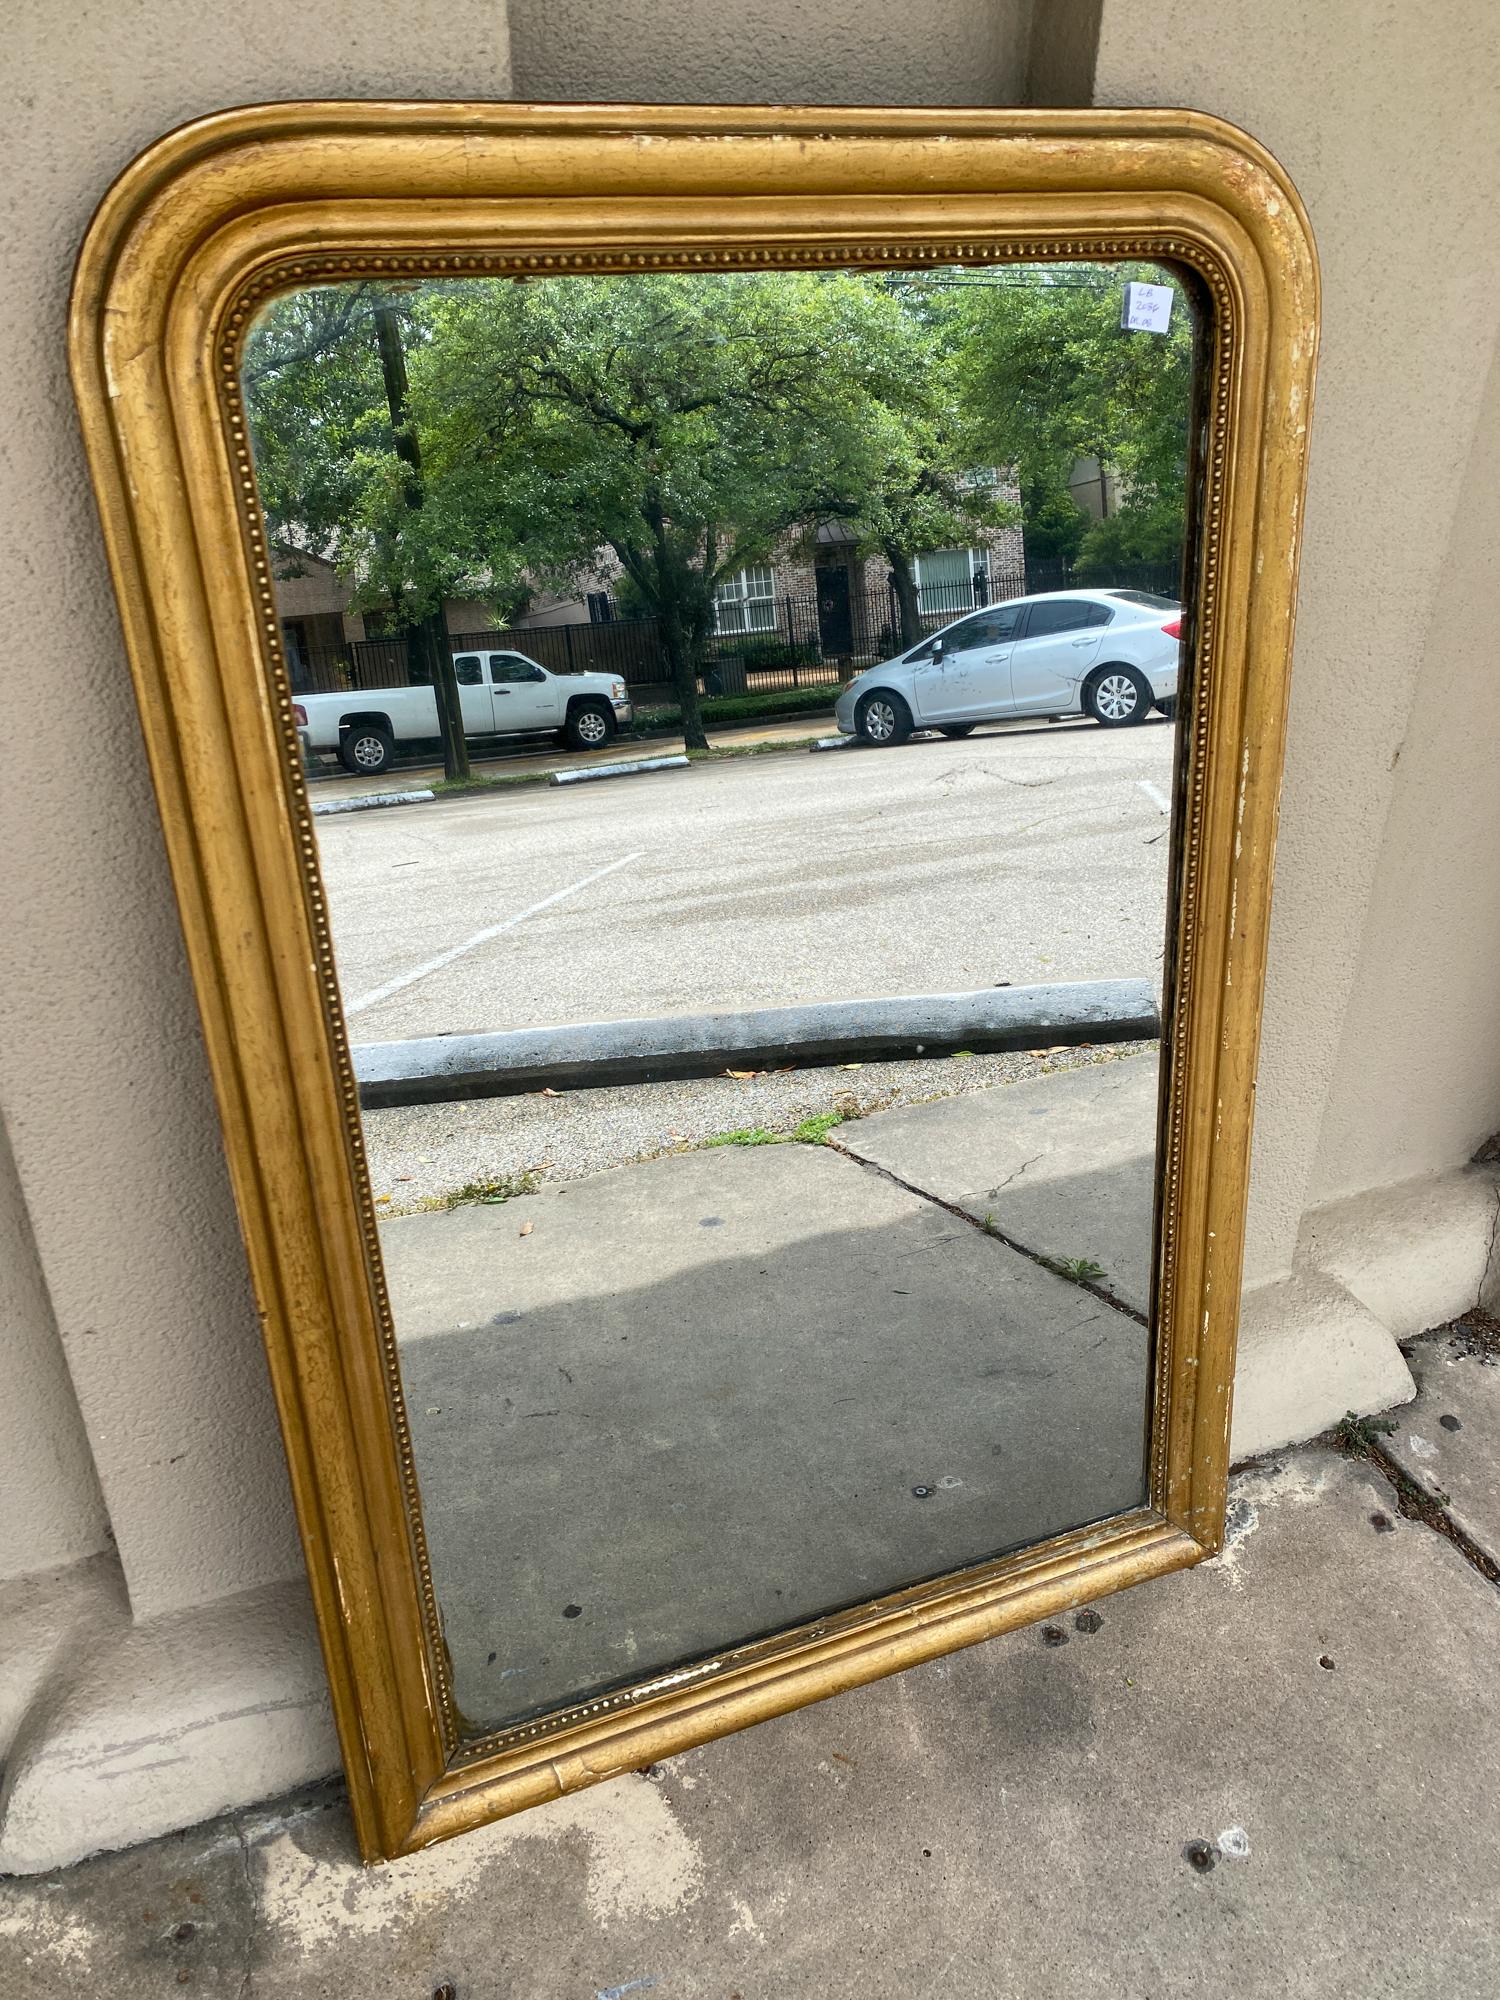 This antique French Louis Philippe mirror has a distressed gilt finish, which looks to have been painted over the original finish some time ago. The beaded edge has some losses, but this mirror has that classic sparkle to the glass, revealing just